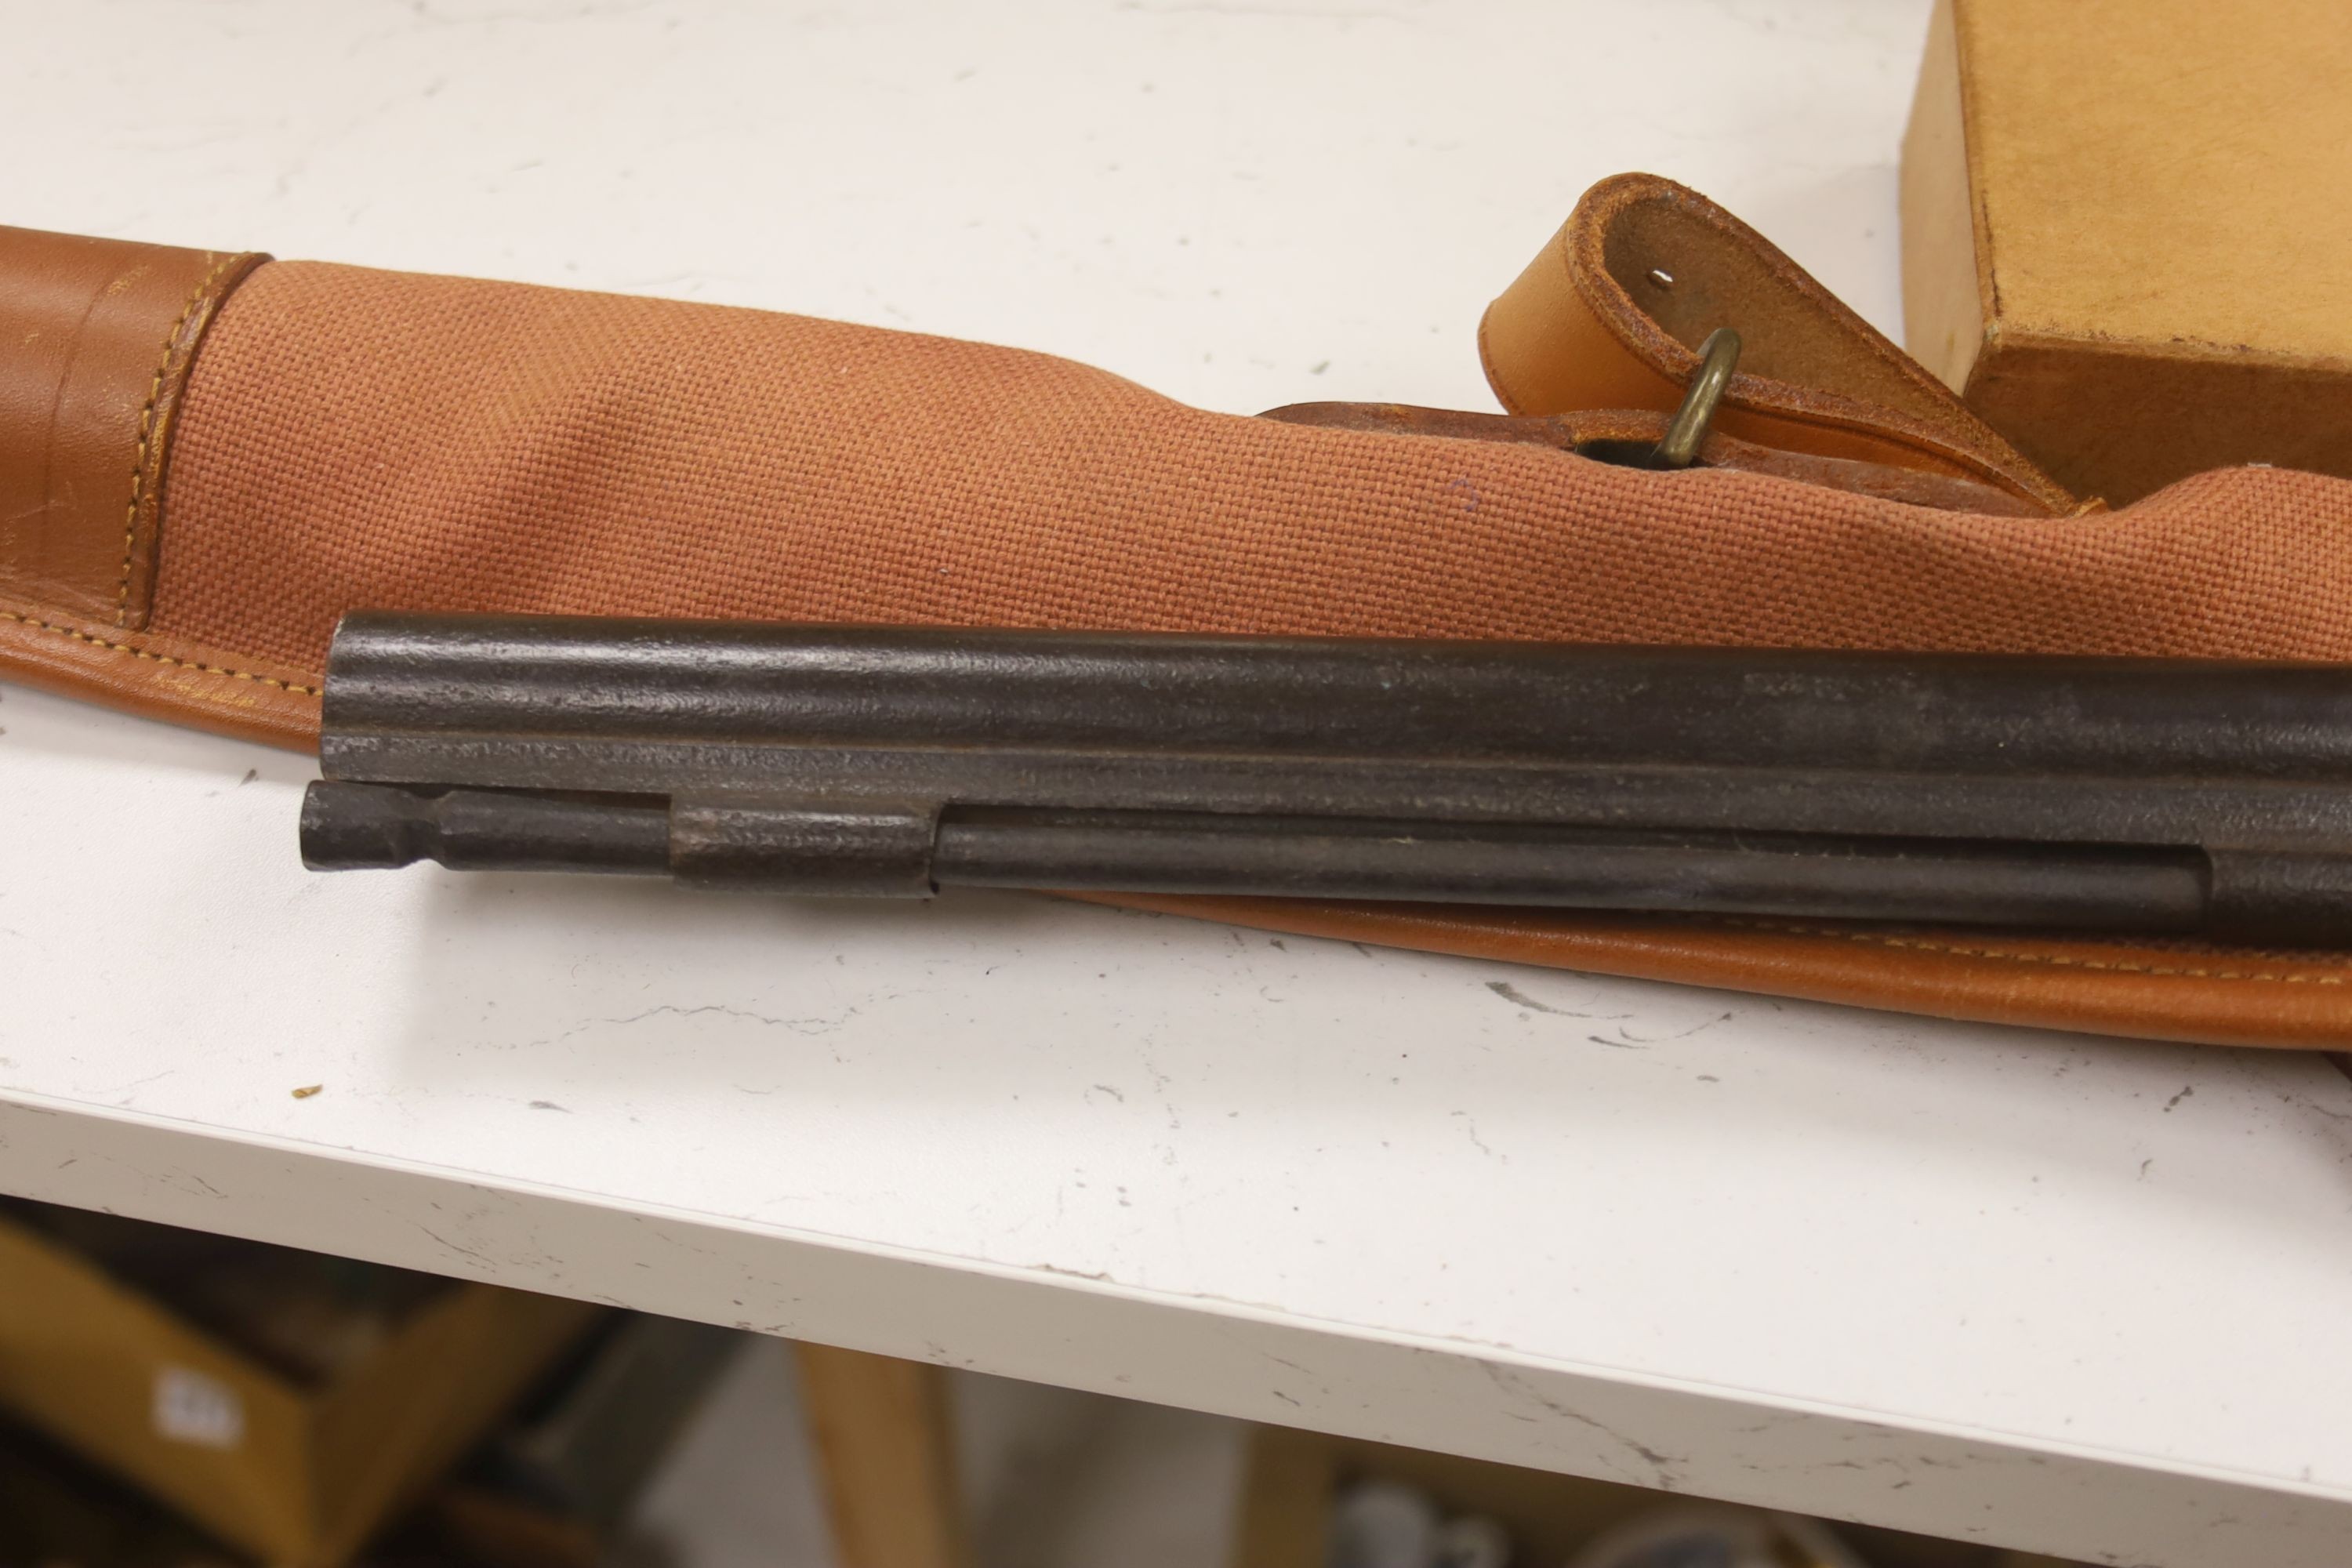 A 19th century percussion rifle, walnut stock, with ram rod, in canvas case, complete with gun cleaning kit